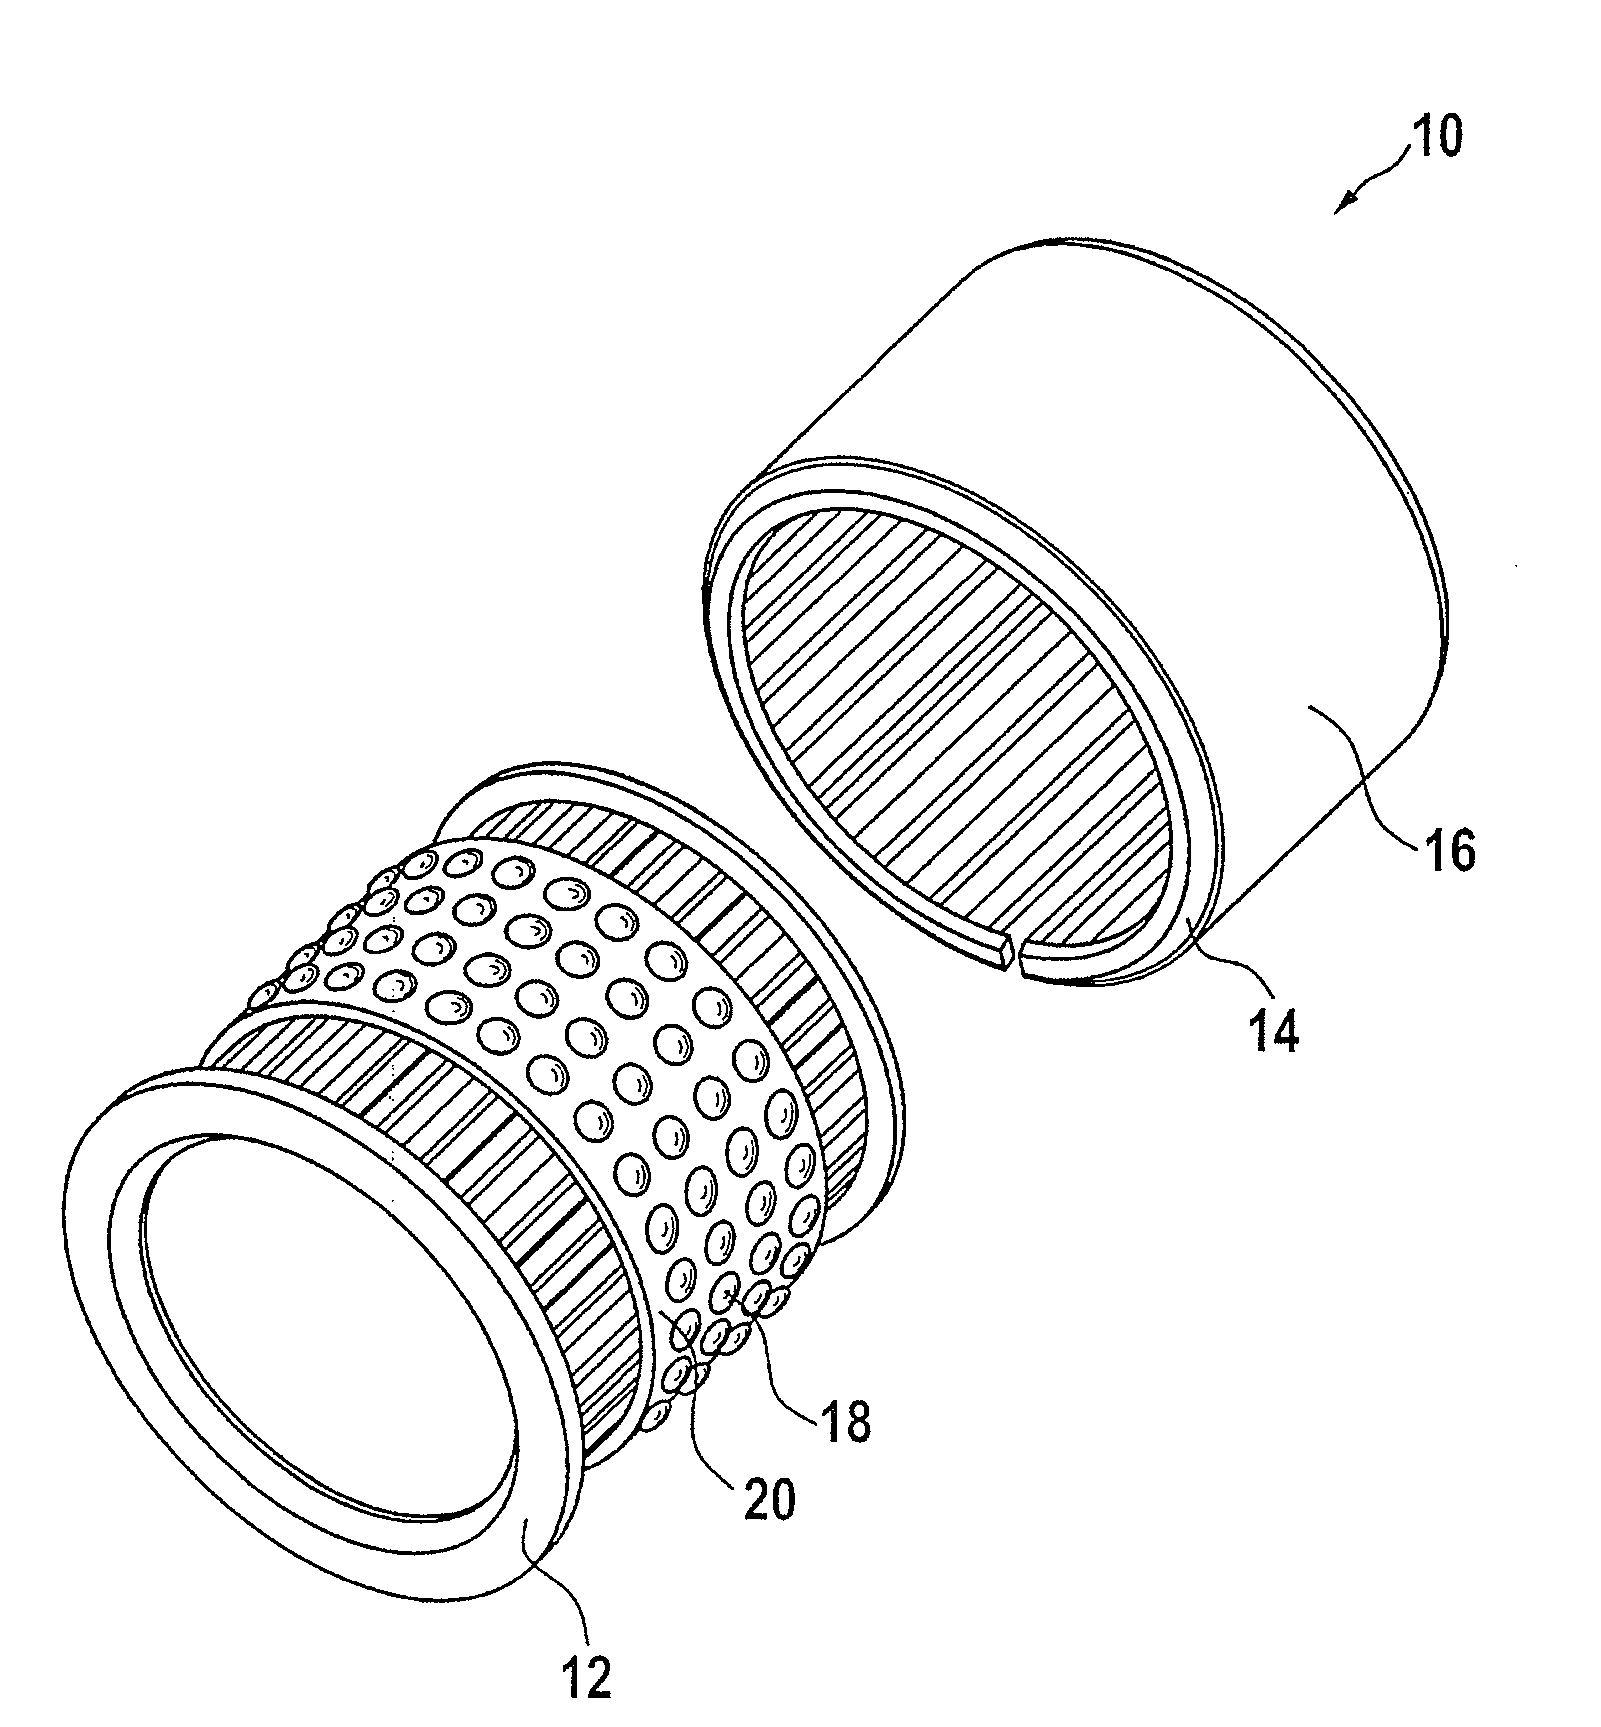 Bi-directional coupling with axial disengagement